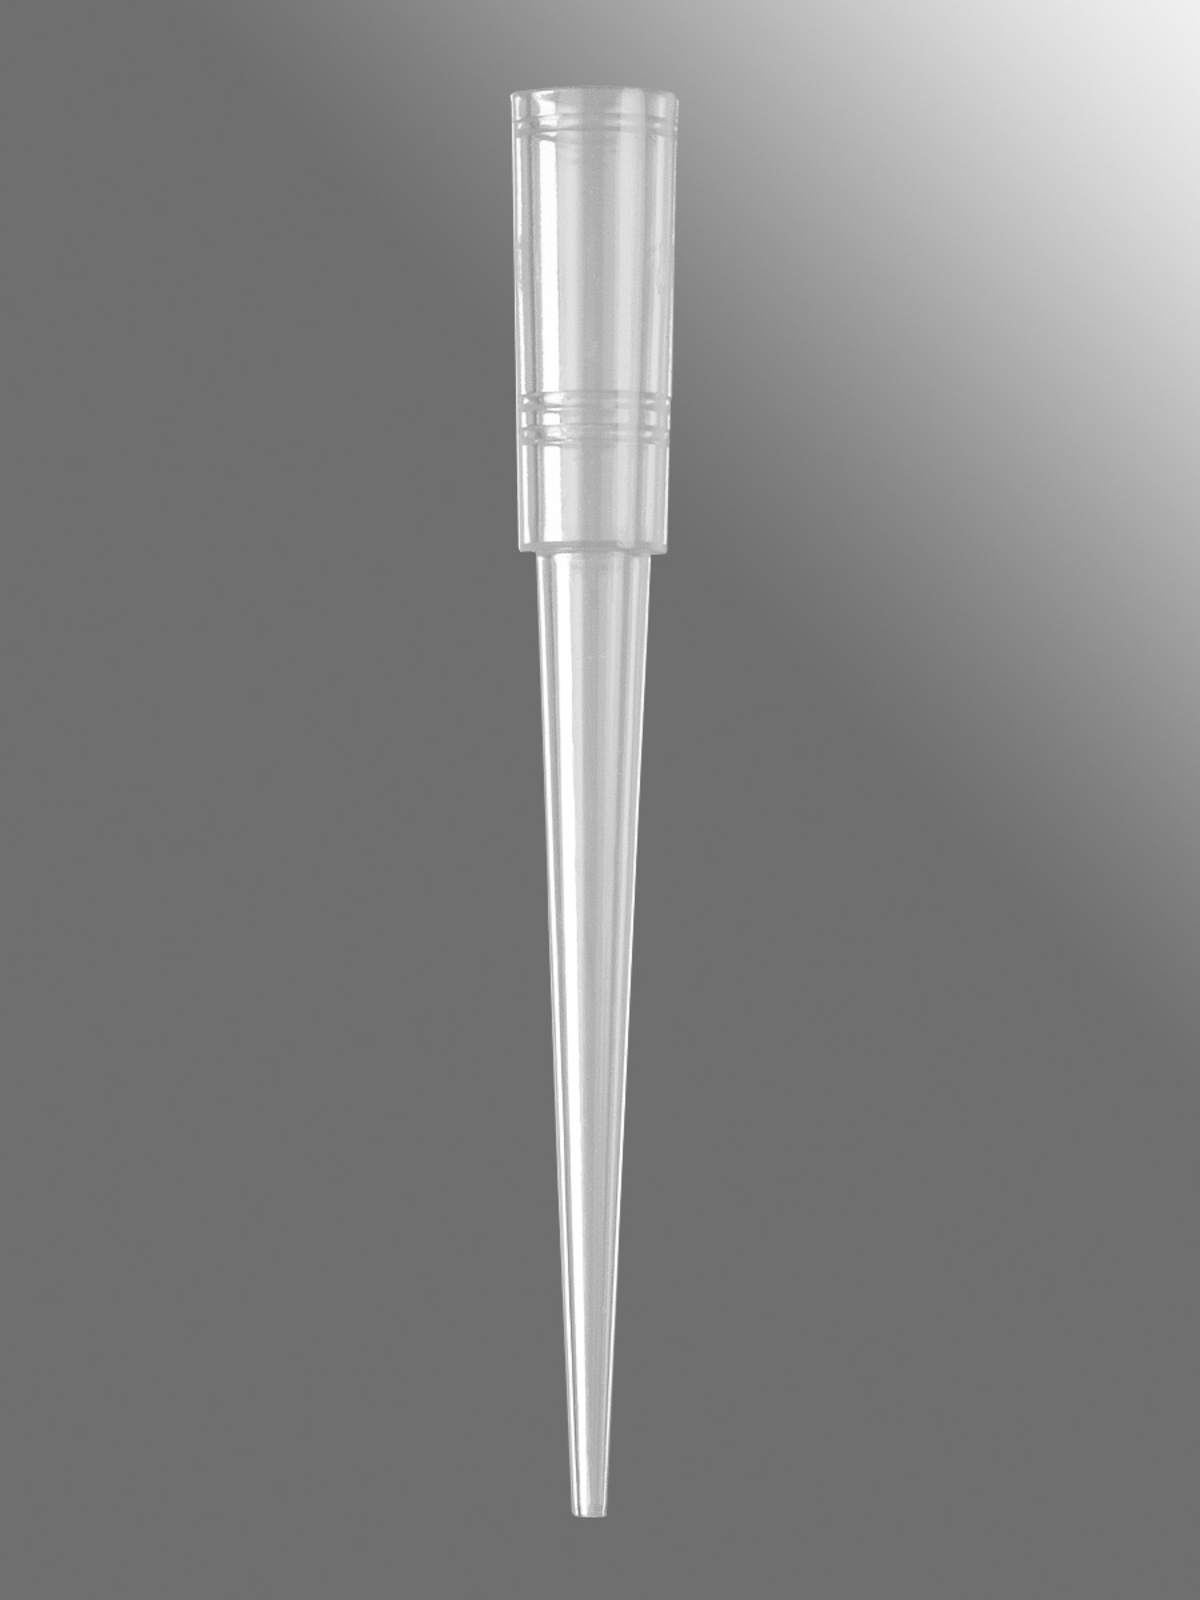 30ul Pre-Sterilized Clear Pipet Tips for Zymark/Caliper Automated Liquid Handling System. 